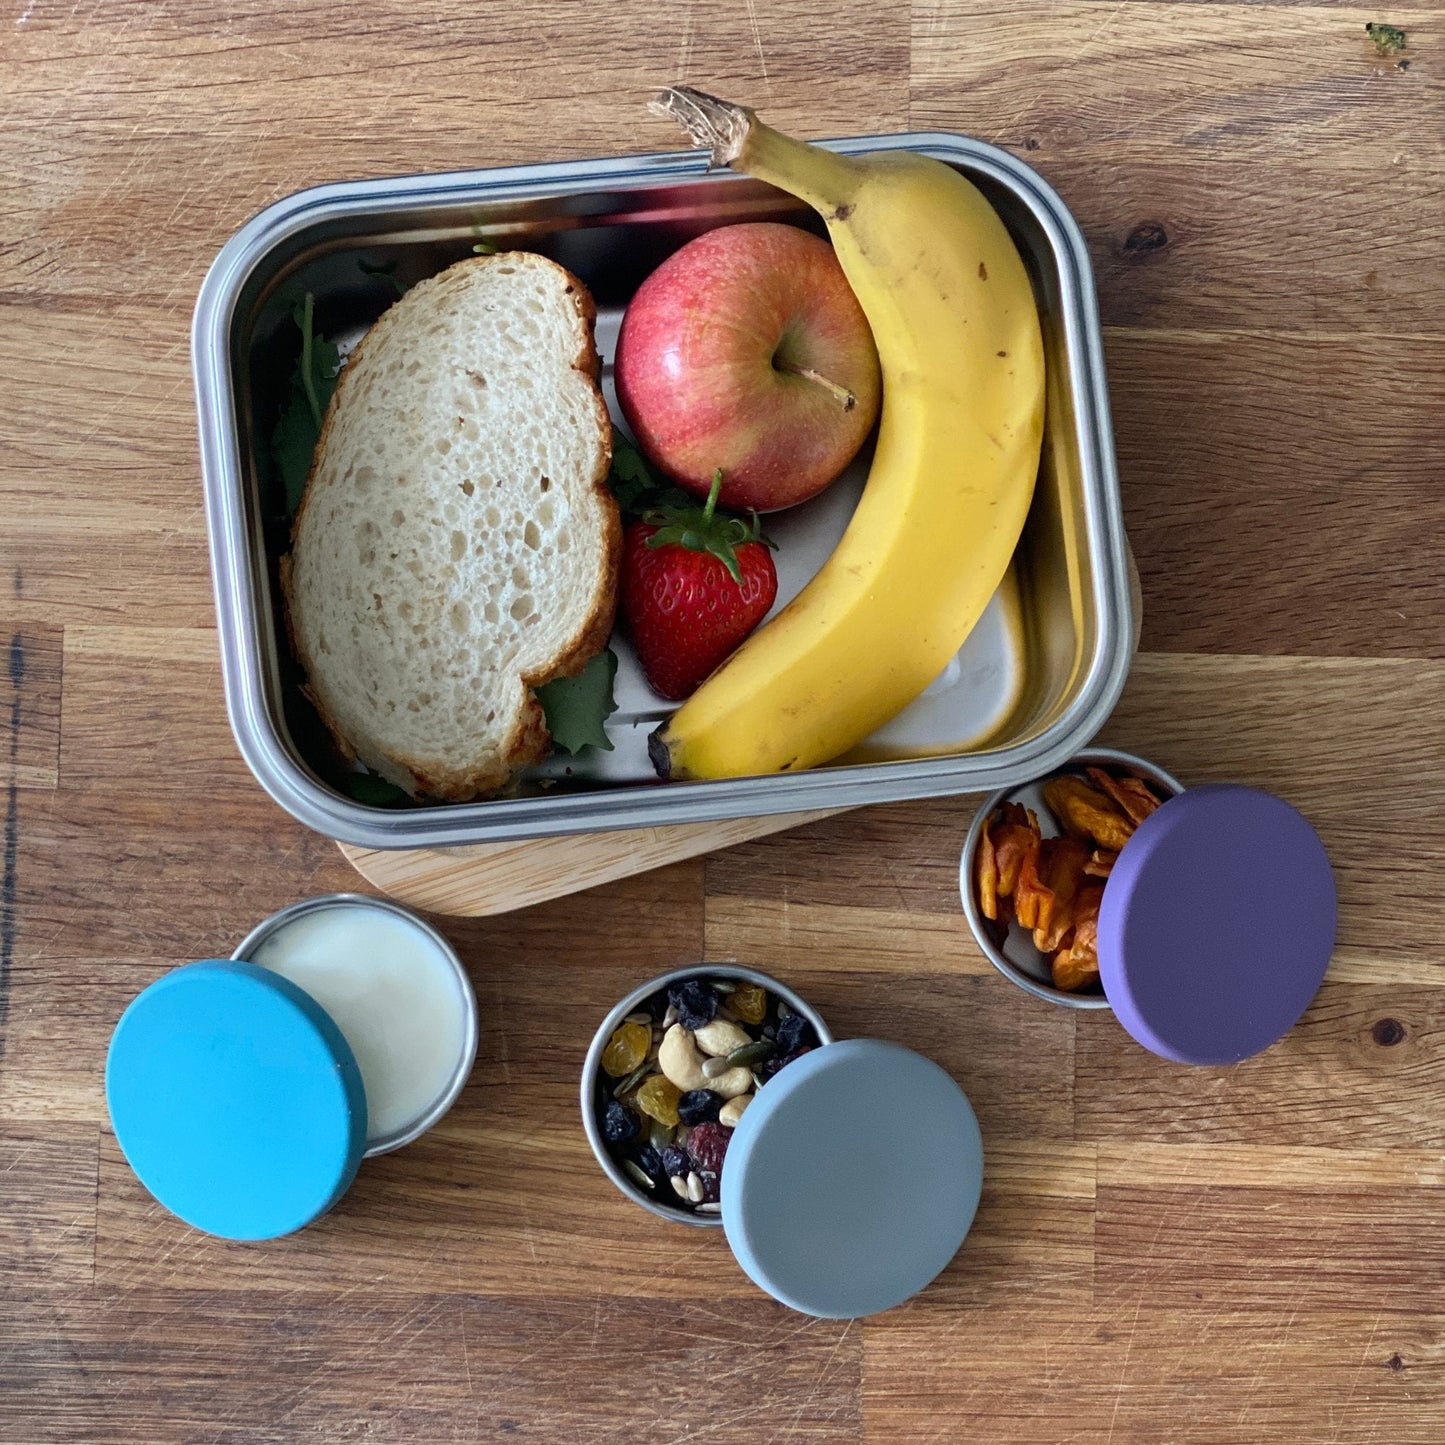 stainless steel lunch box, eco bento box uk moonmoon, metal bento lunch box, bento box metal, lunchbox for adults